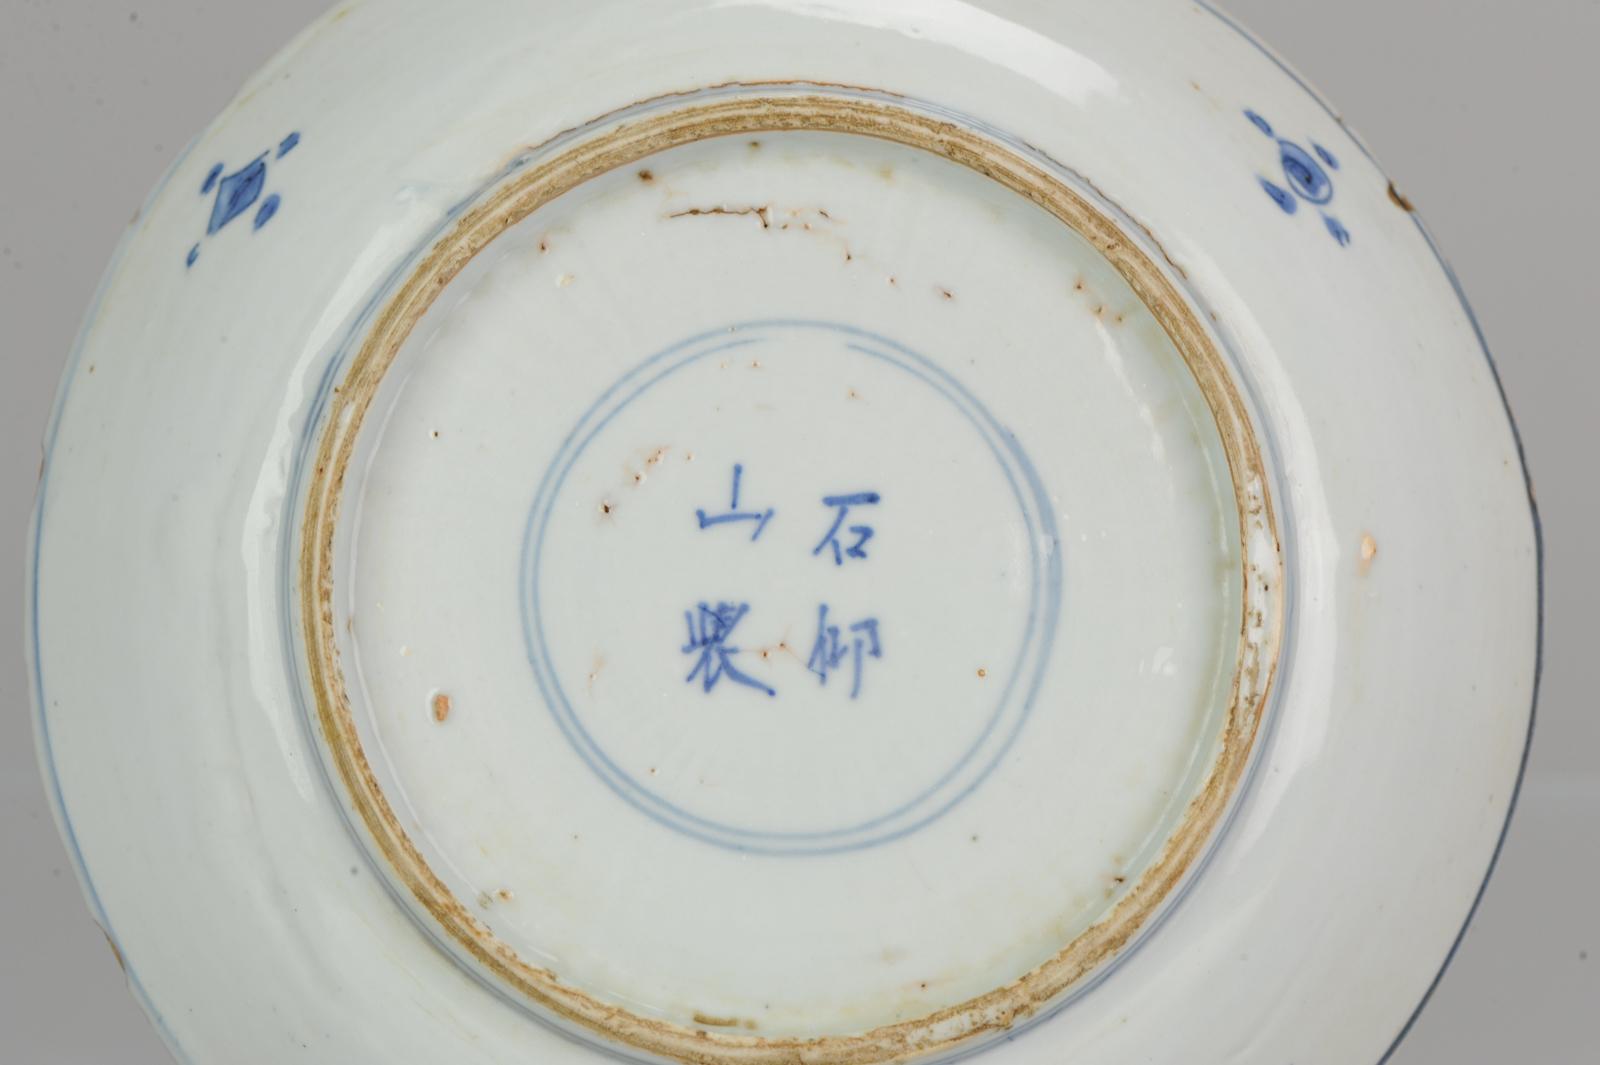 Ming Antique Chinese Porcelain Ca 1600-1640 Kosometsuke Plate Shou Lao 8 Immortals For Sale